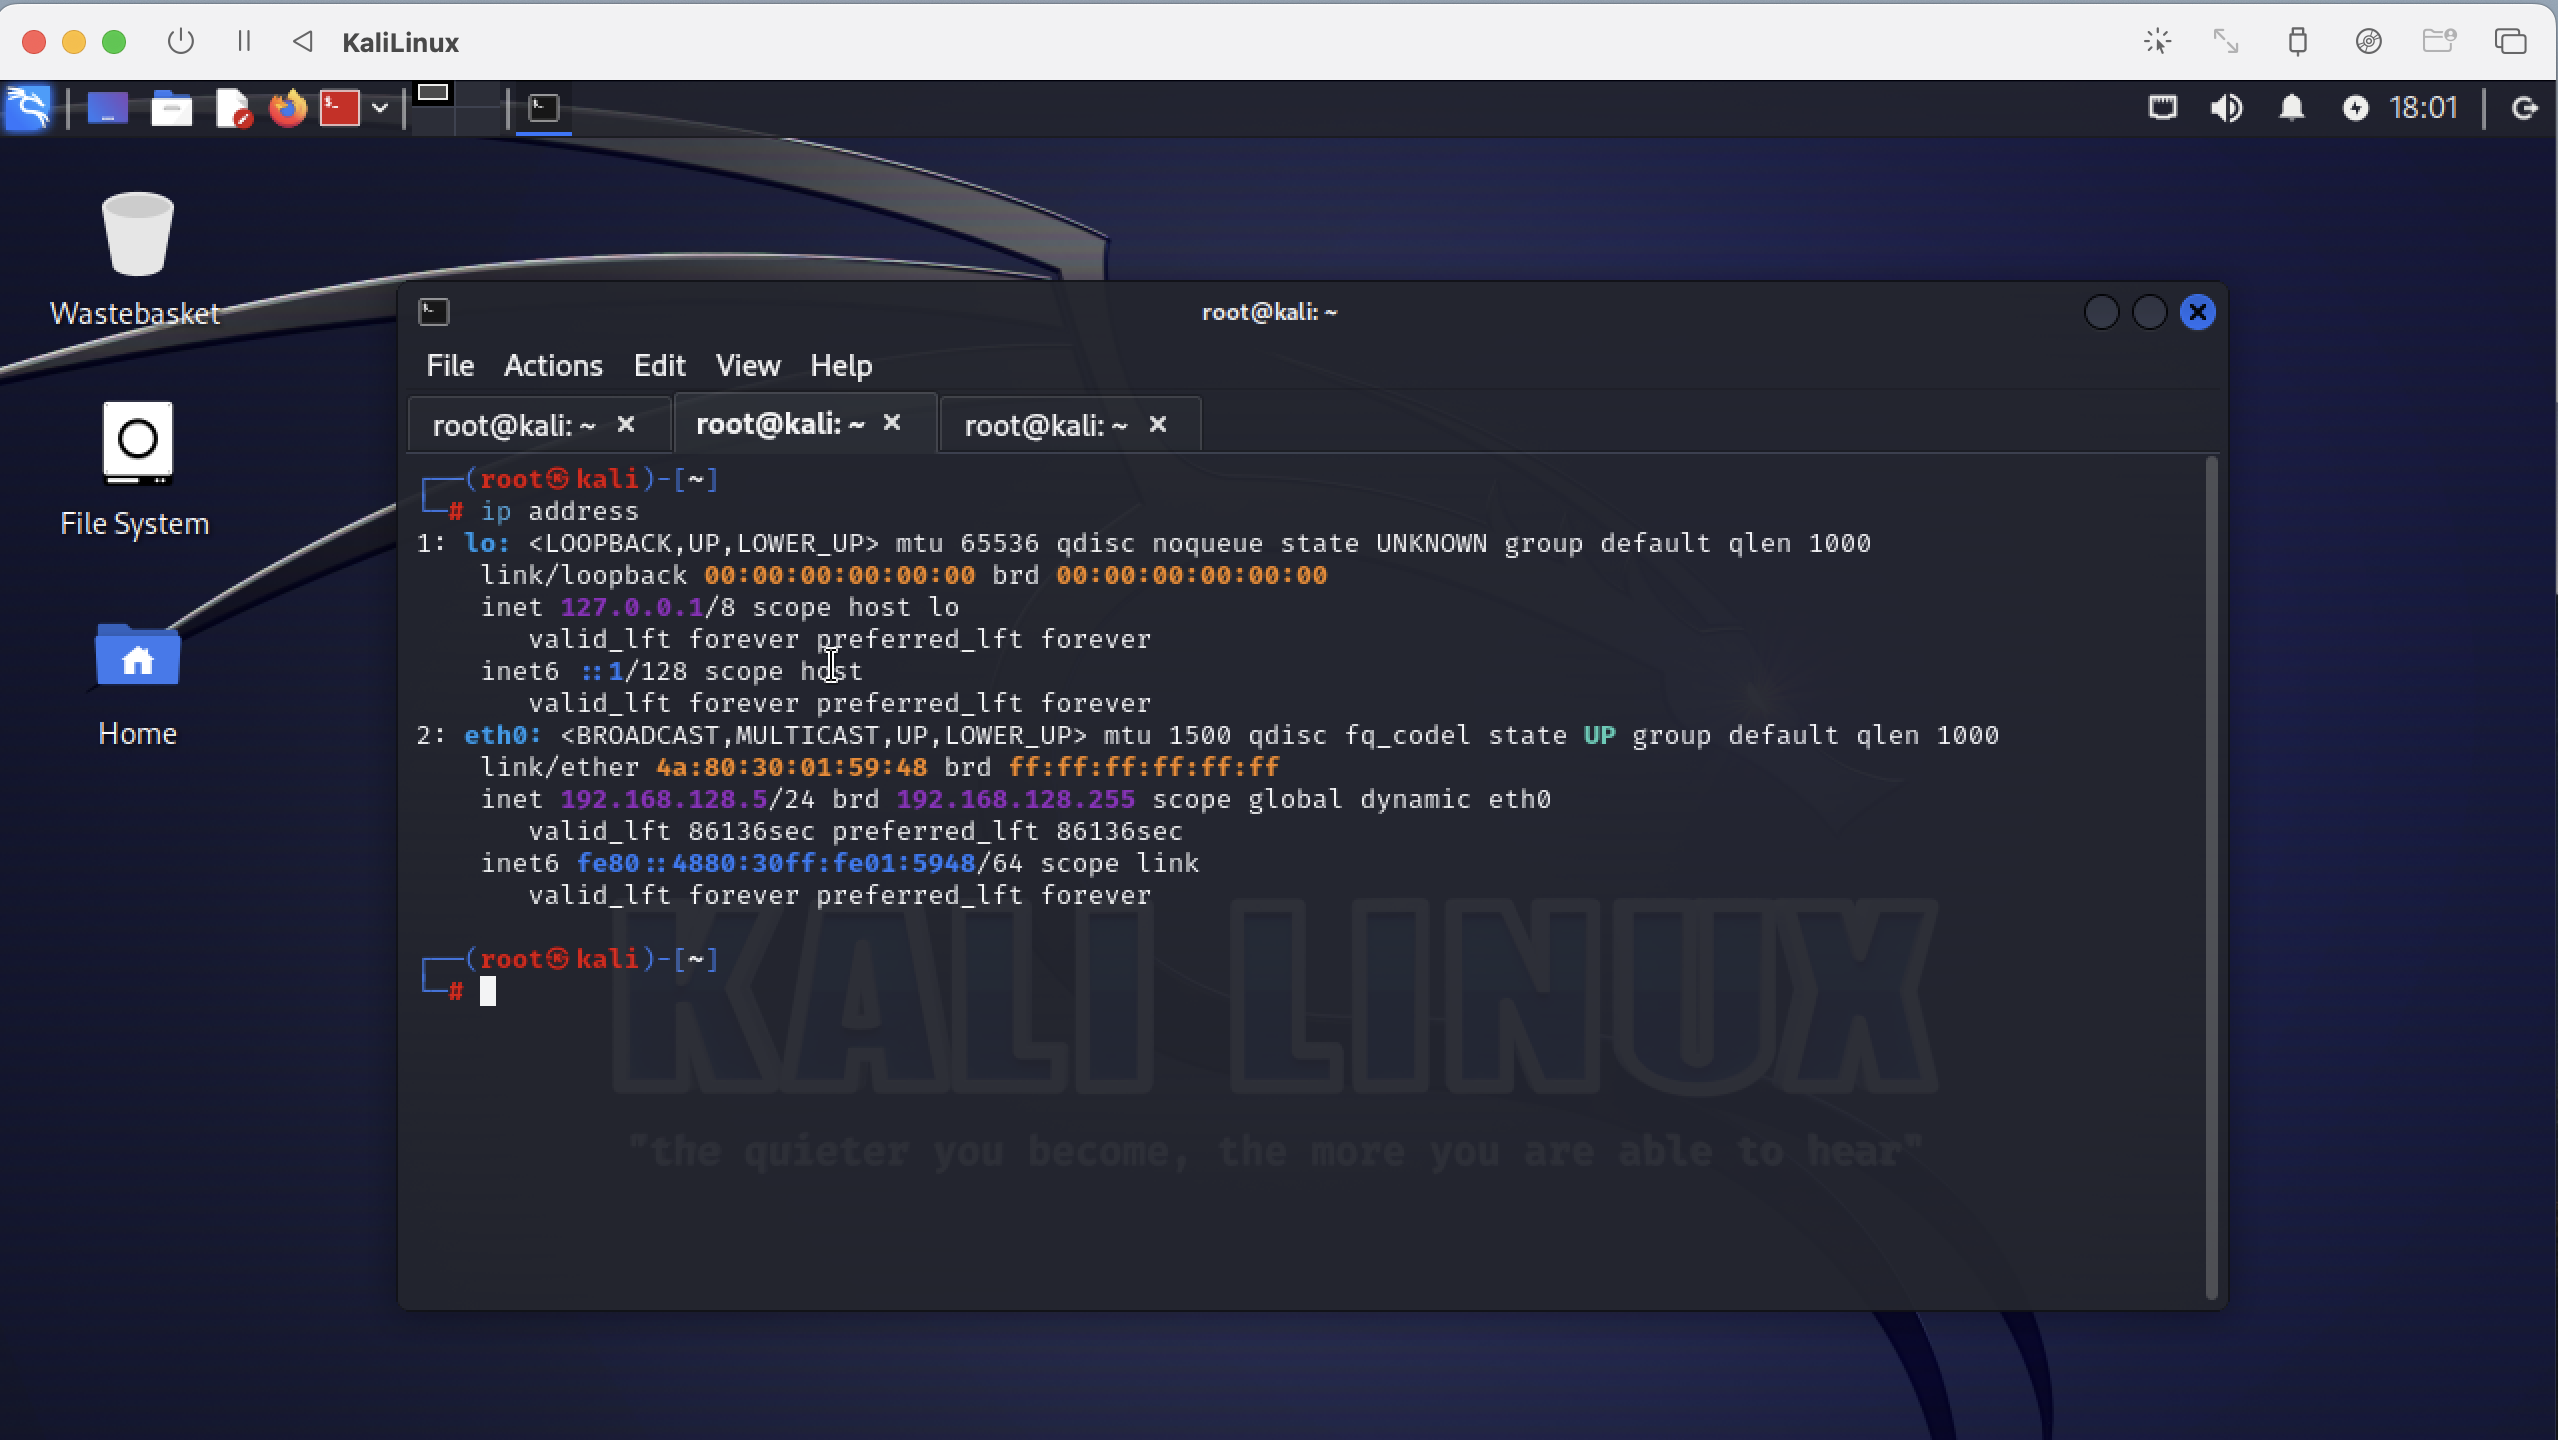 Check the IP Addess of KaliLinux